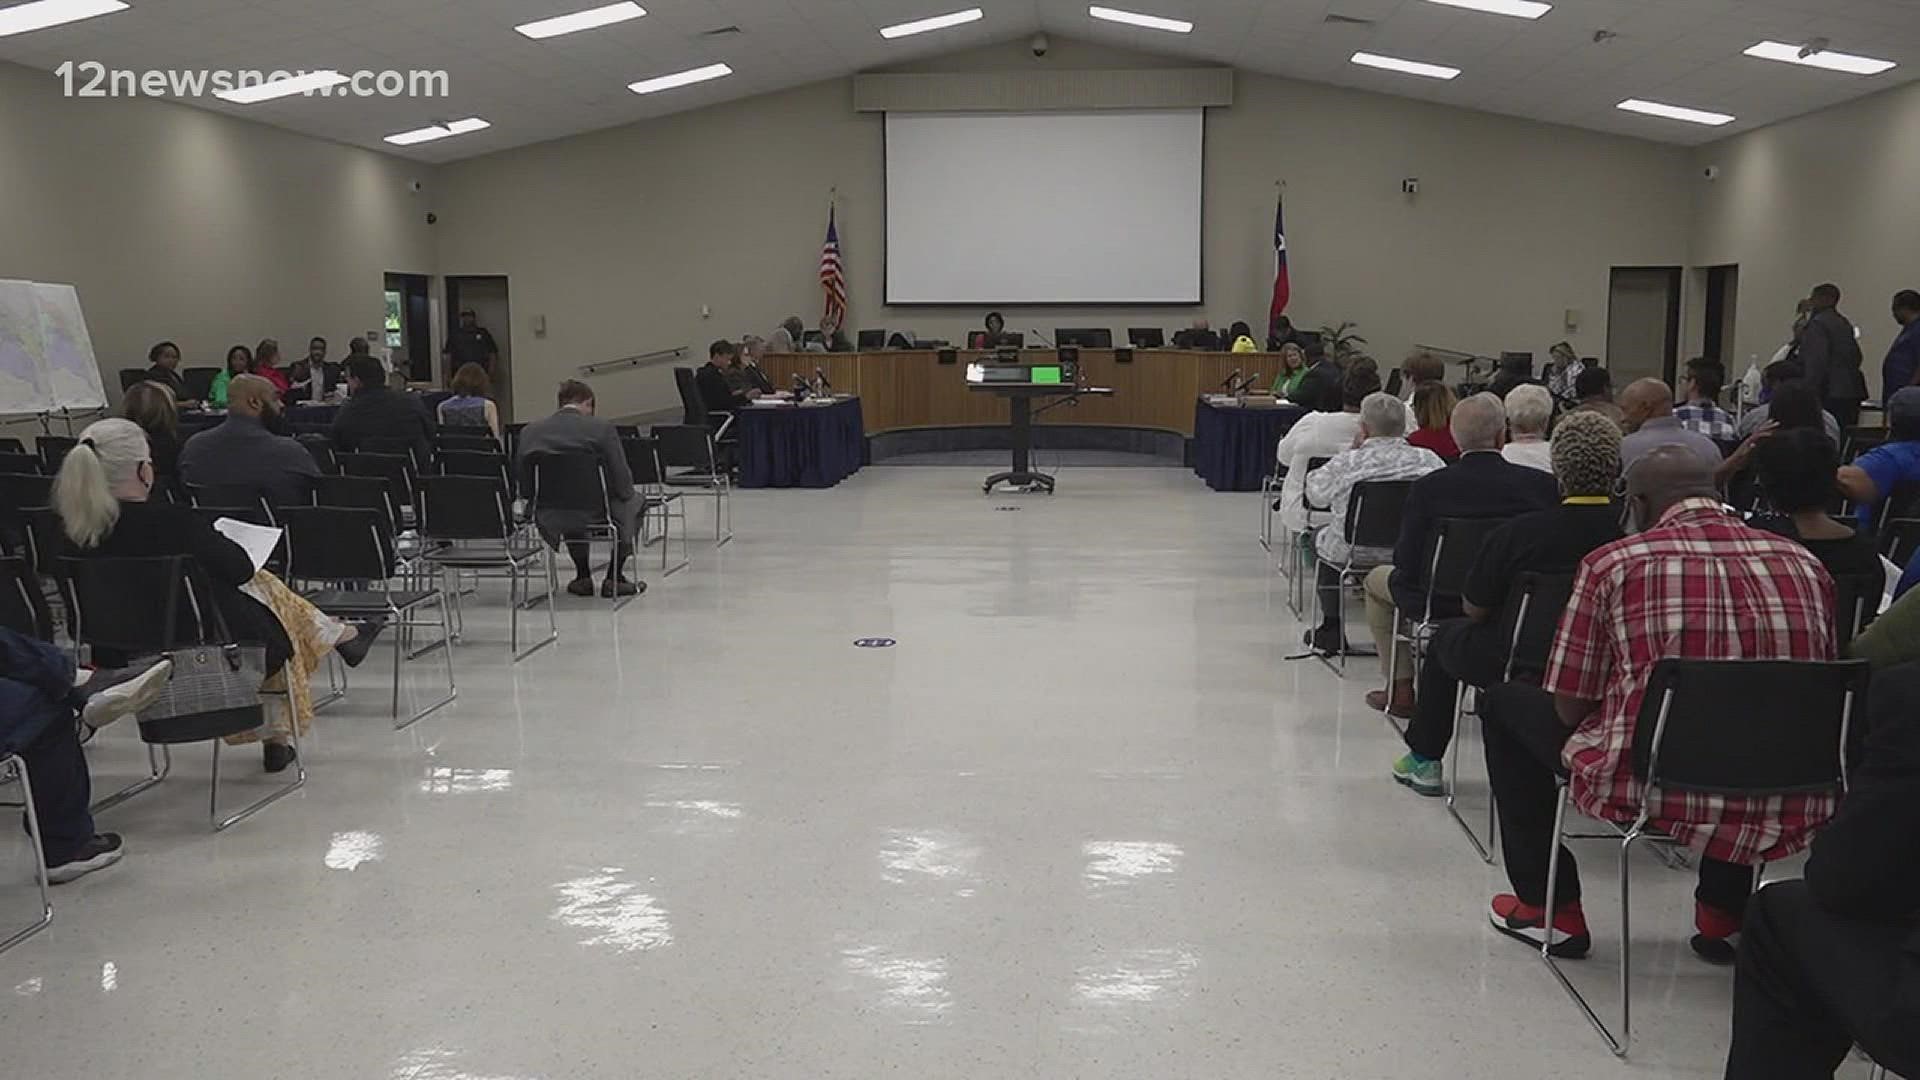 The motion failed with a 4-3 vote against changing the name to the Carrol A. "Butch" Thomas Educational Support Center.